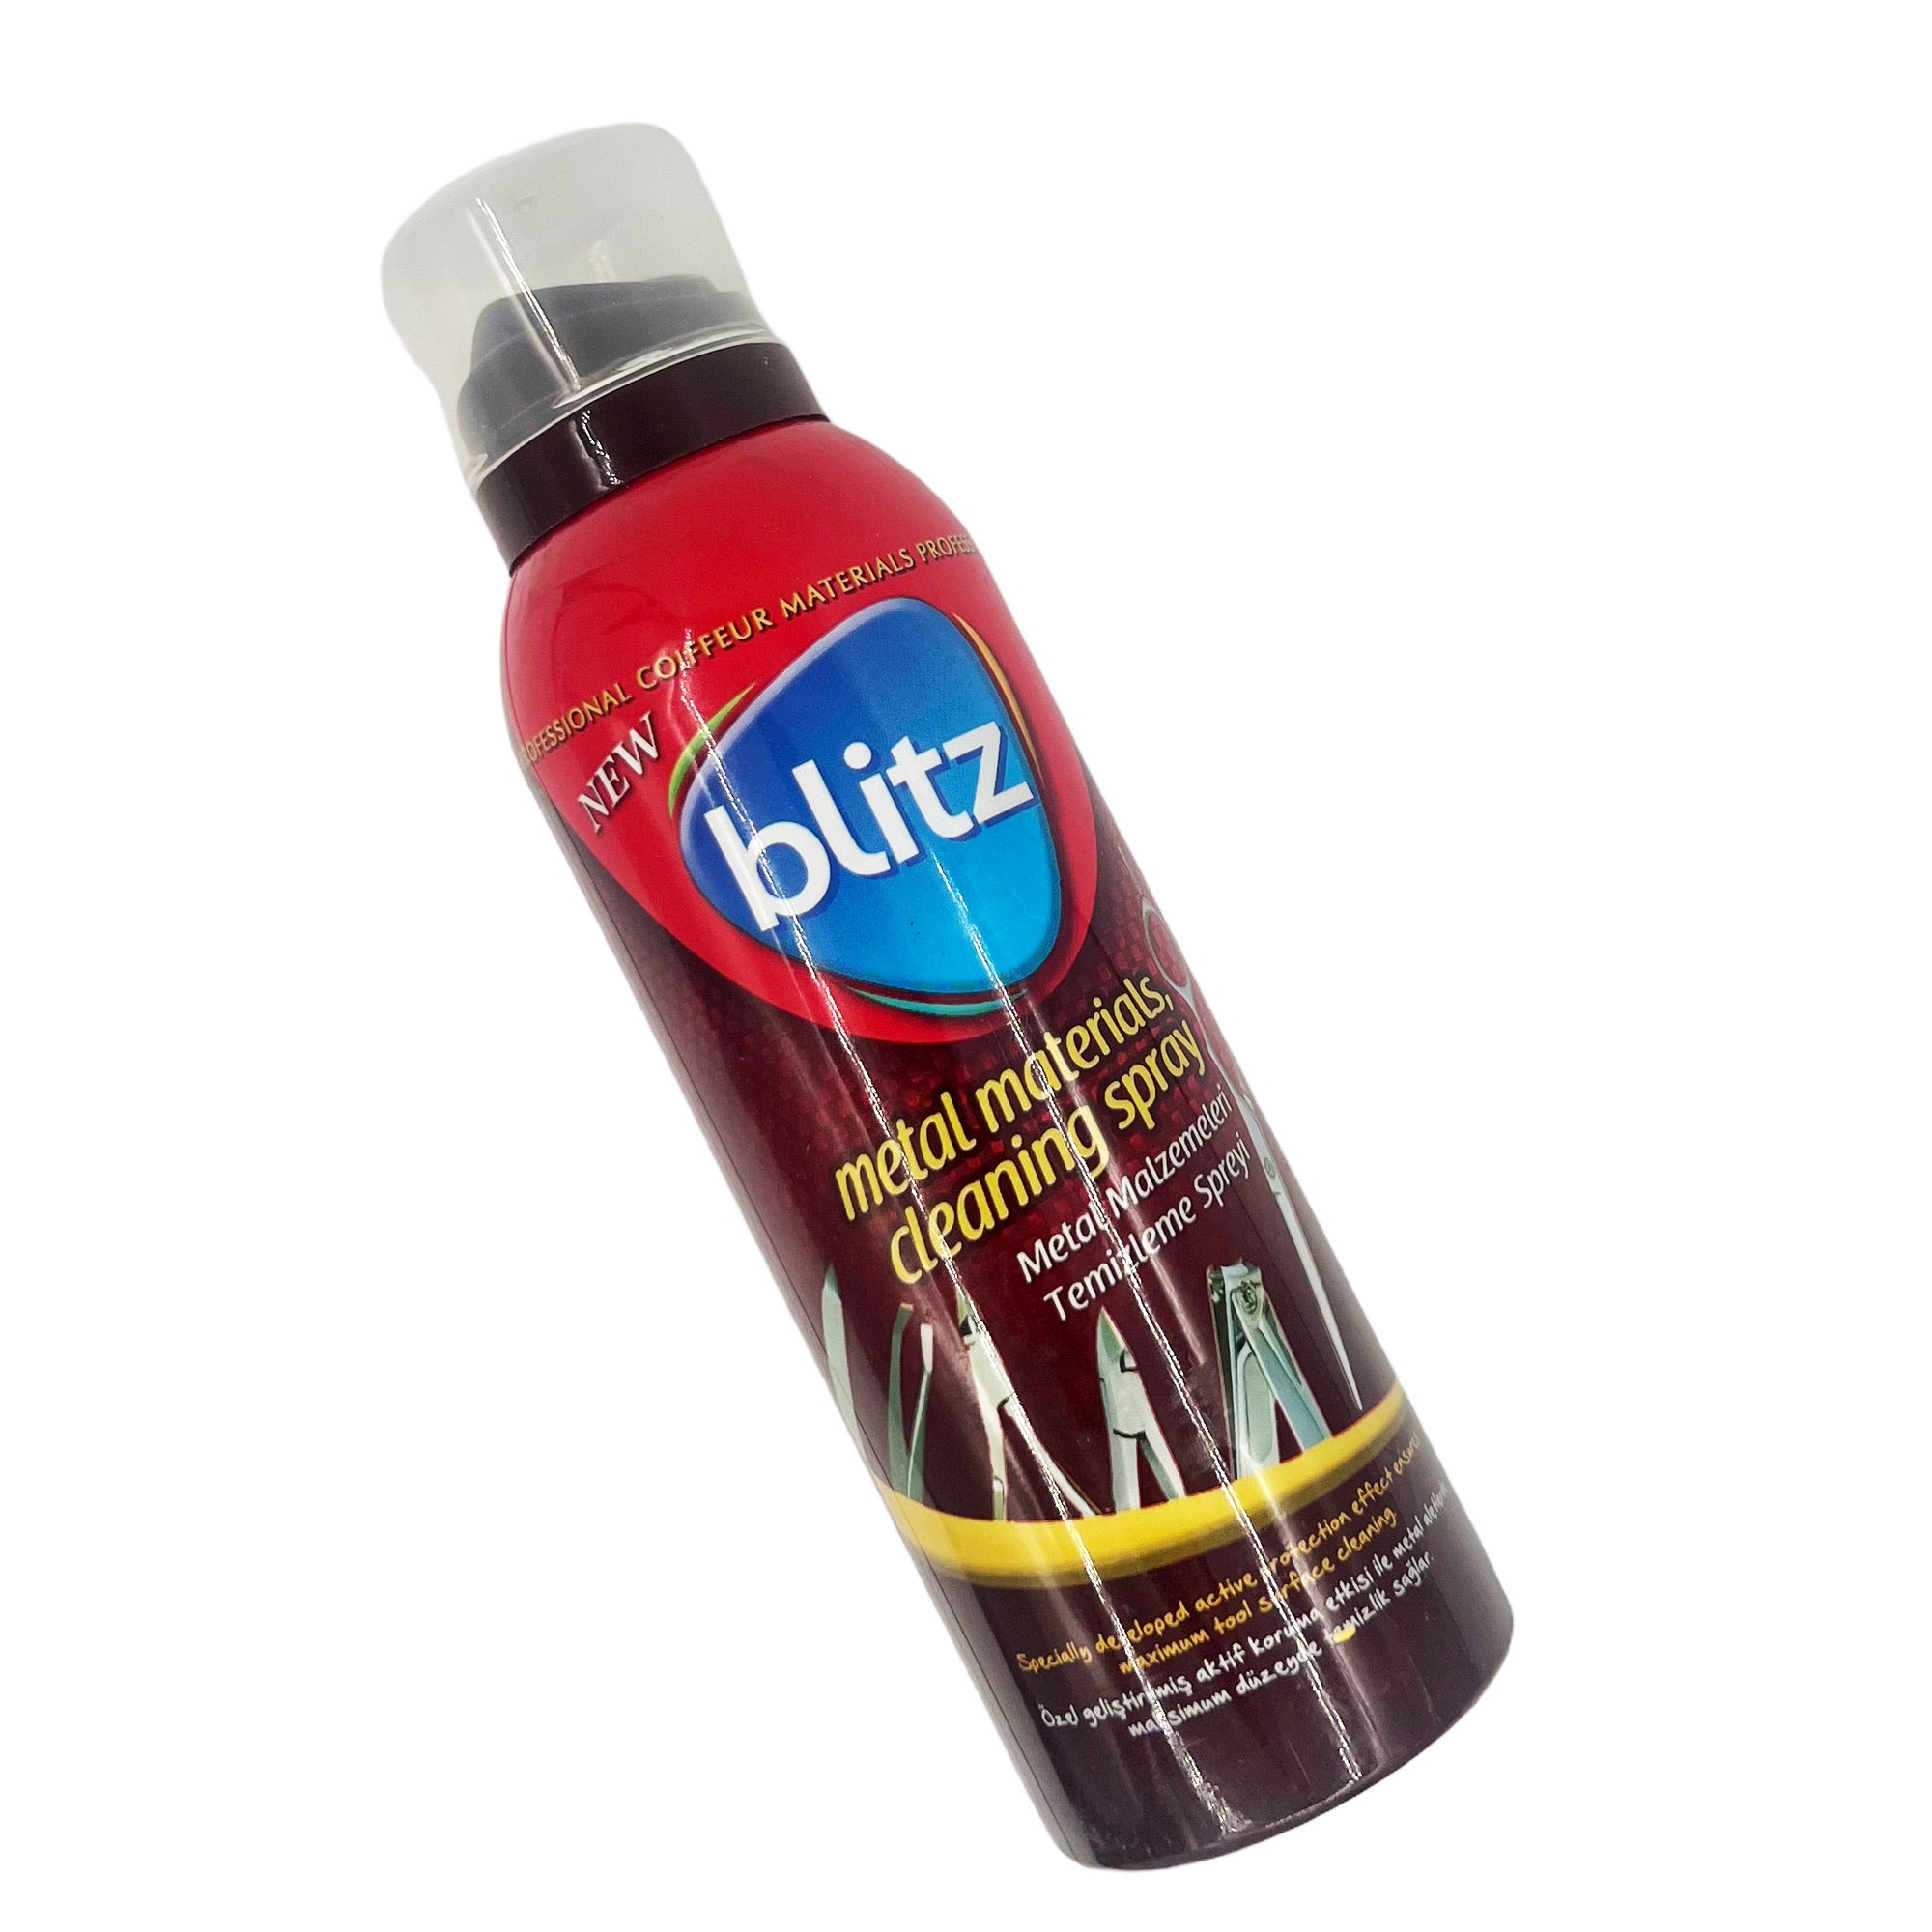 Blitz - Metal Materials Cleaning Spray for Barber & Salon Tools 150ml